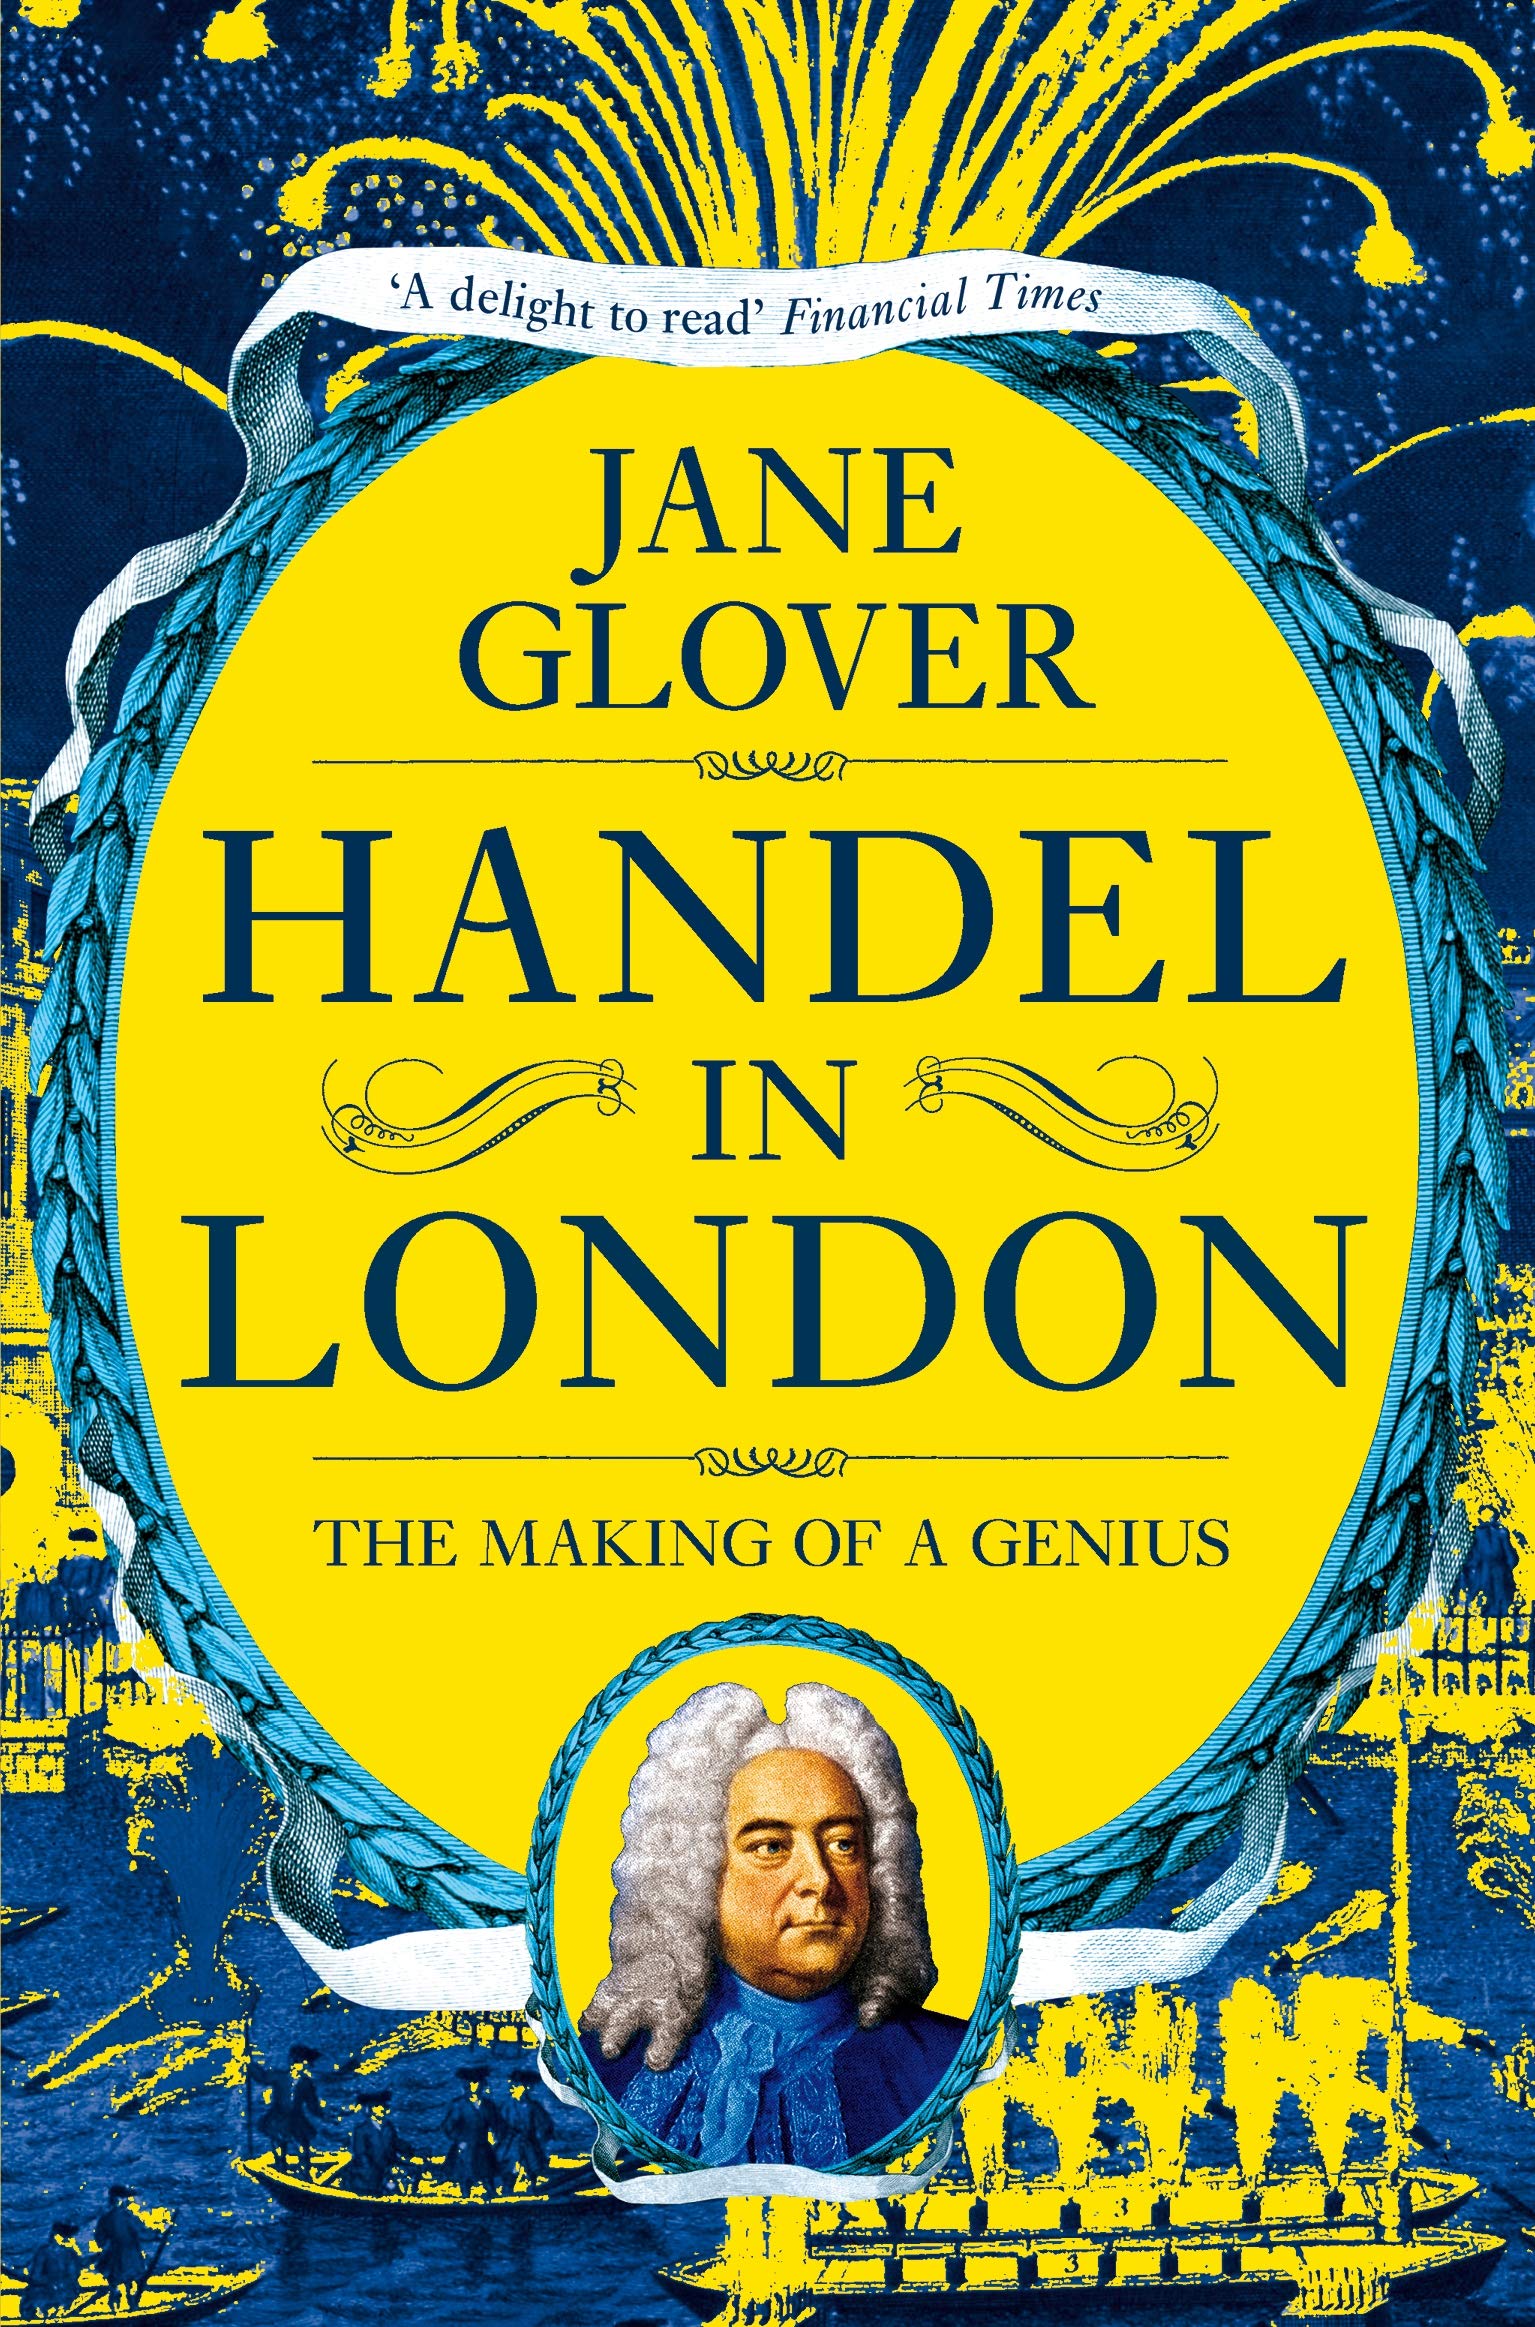 Handel in London: The Making of a Genius by Jane Glover.